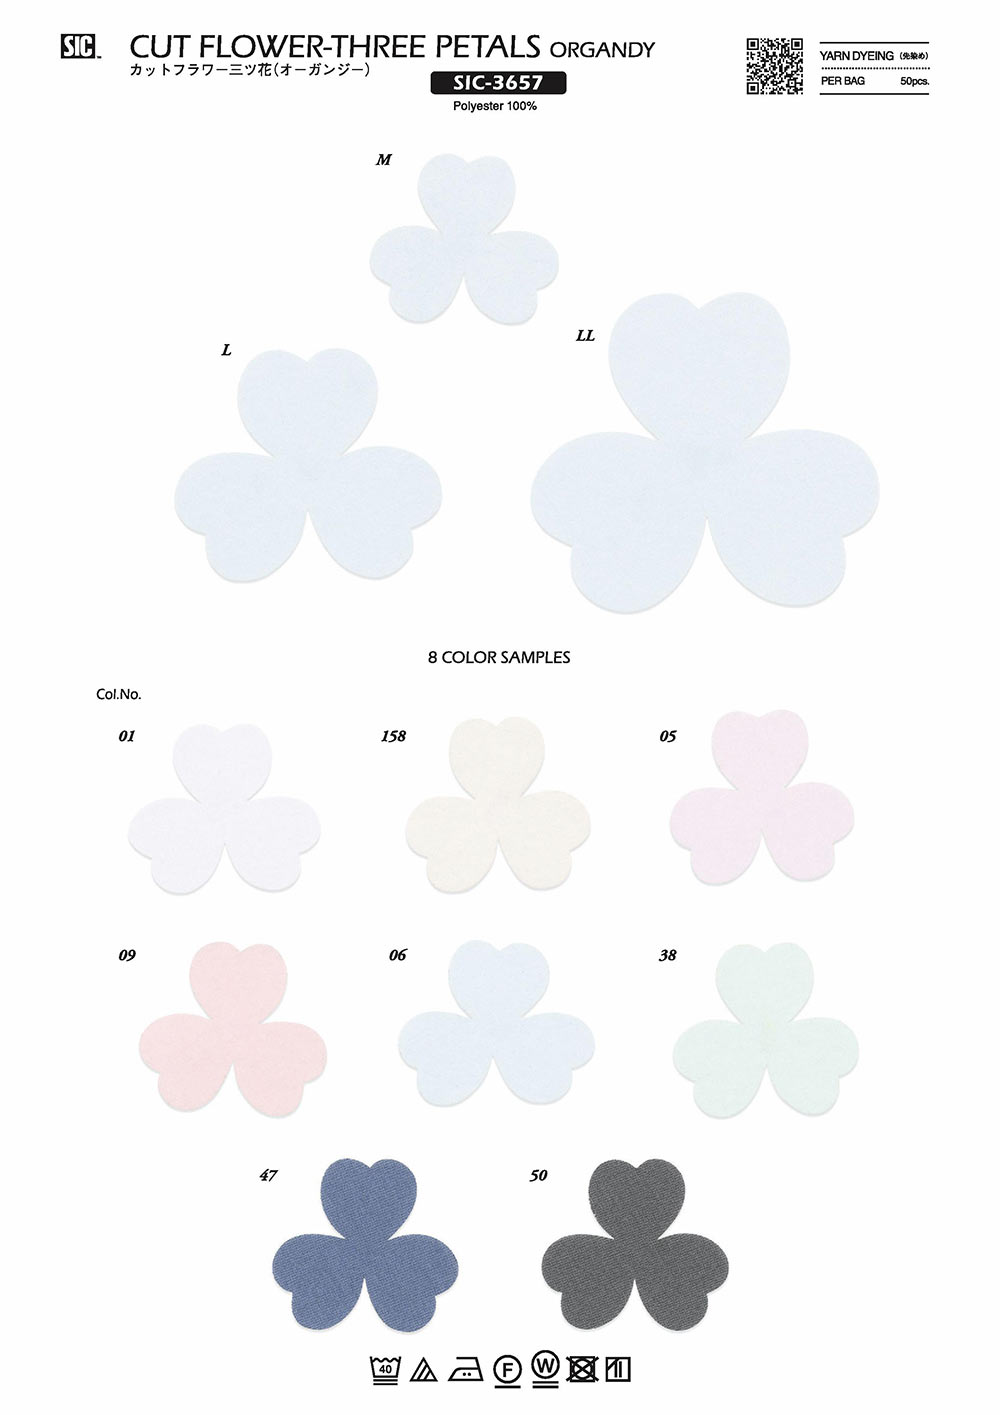 SIC-3657 Cut Flower Mitsuhana (Organdy)[Miscellaneous Goods And Others] SHINDO(SIC)